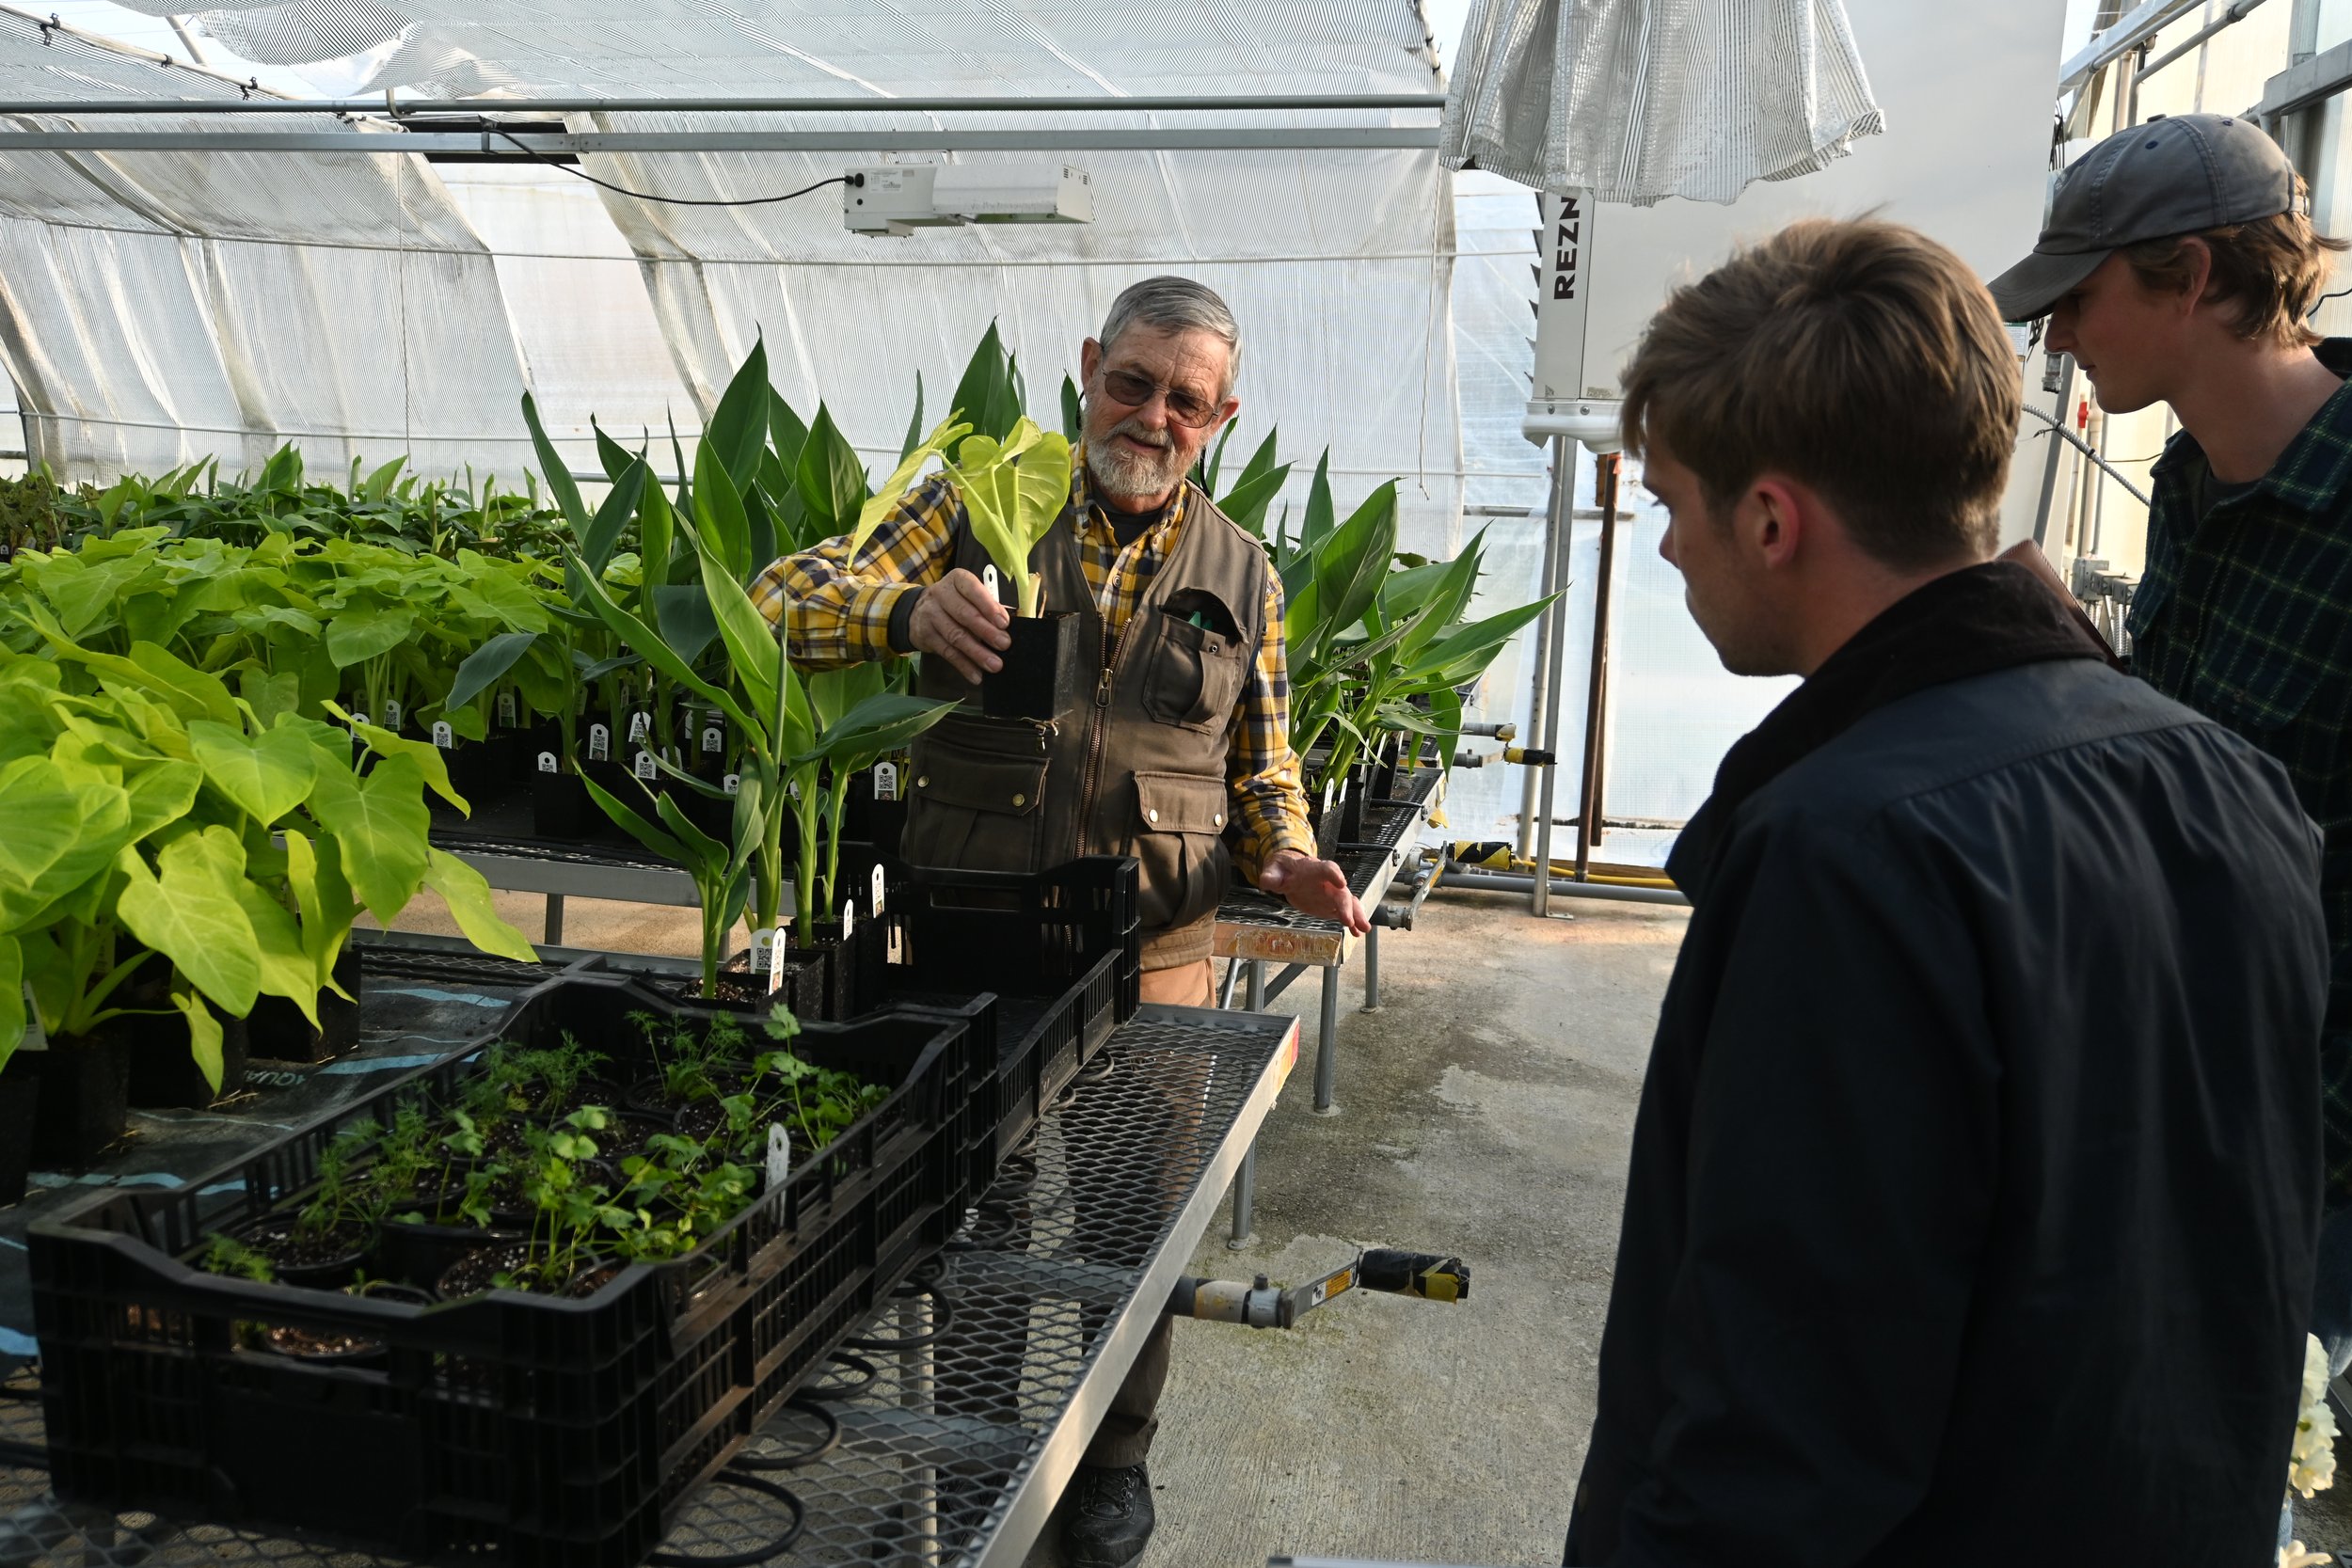  Brent sharing some of the propagation approaches in the production greenhouses.  